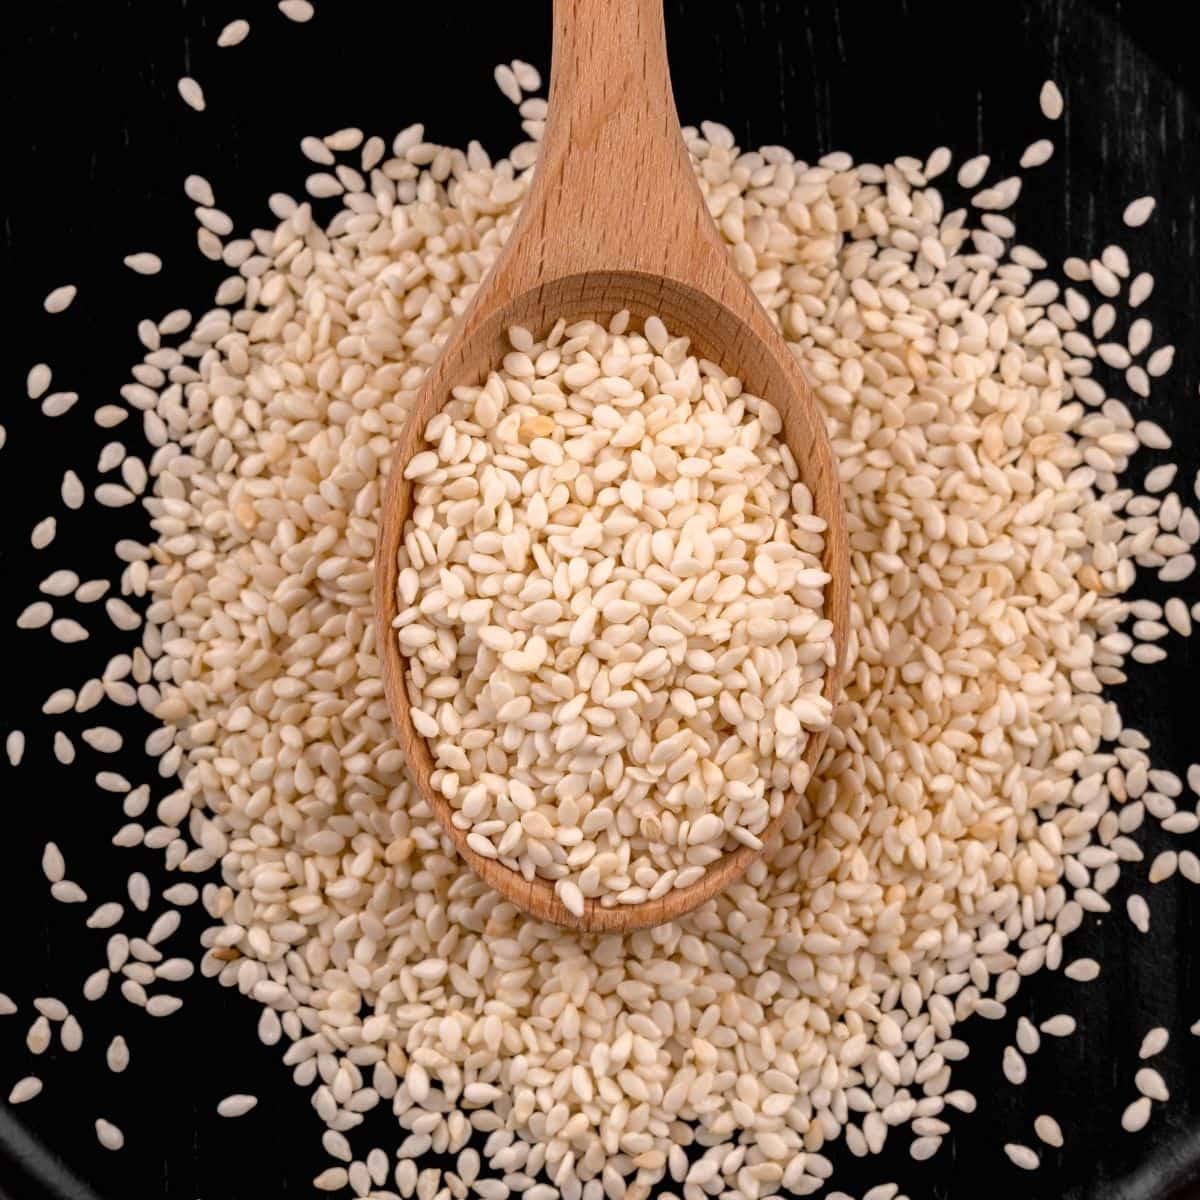 wood spoon full of sesame seeds on a black plate that is also filled with sesame seeds